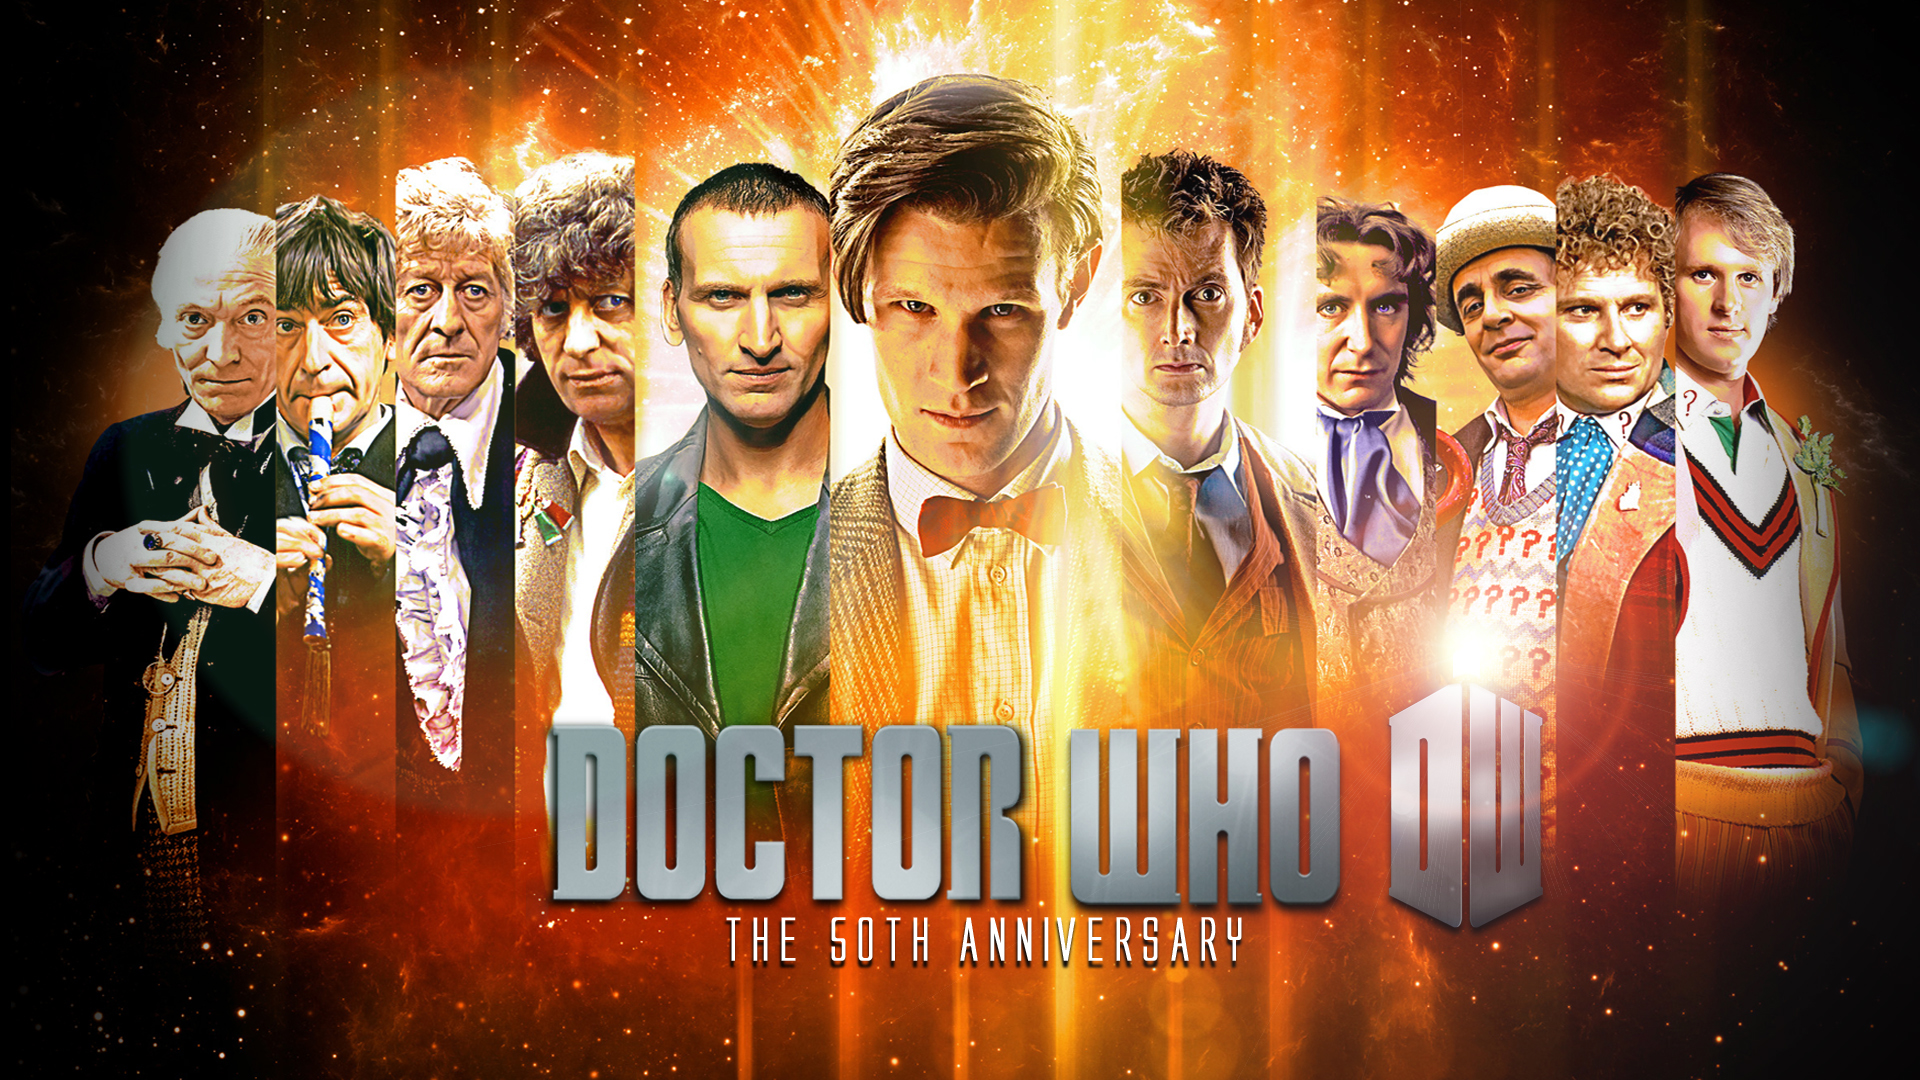 Doctor Who images Doctor Who The 50th Anniversary wallpaper photos 1920x1080